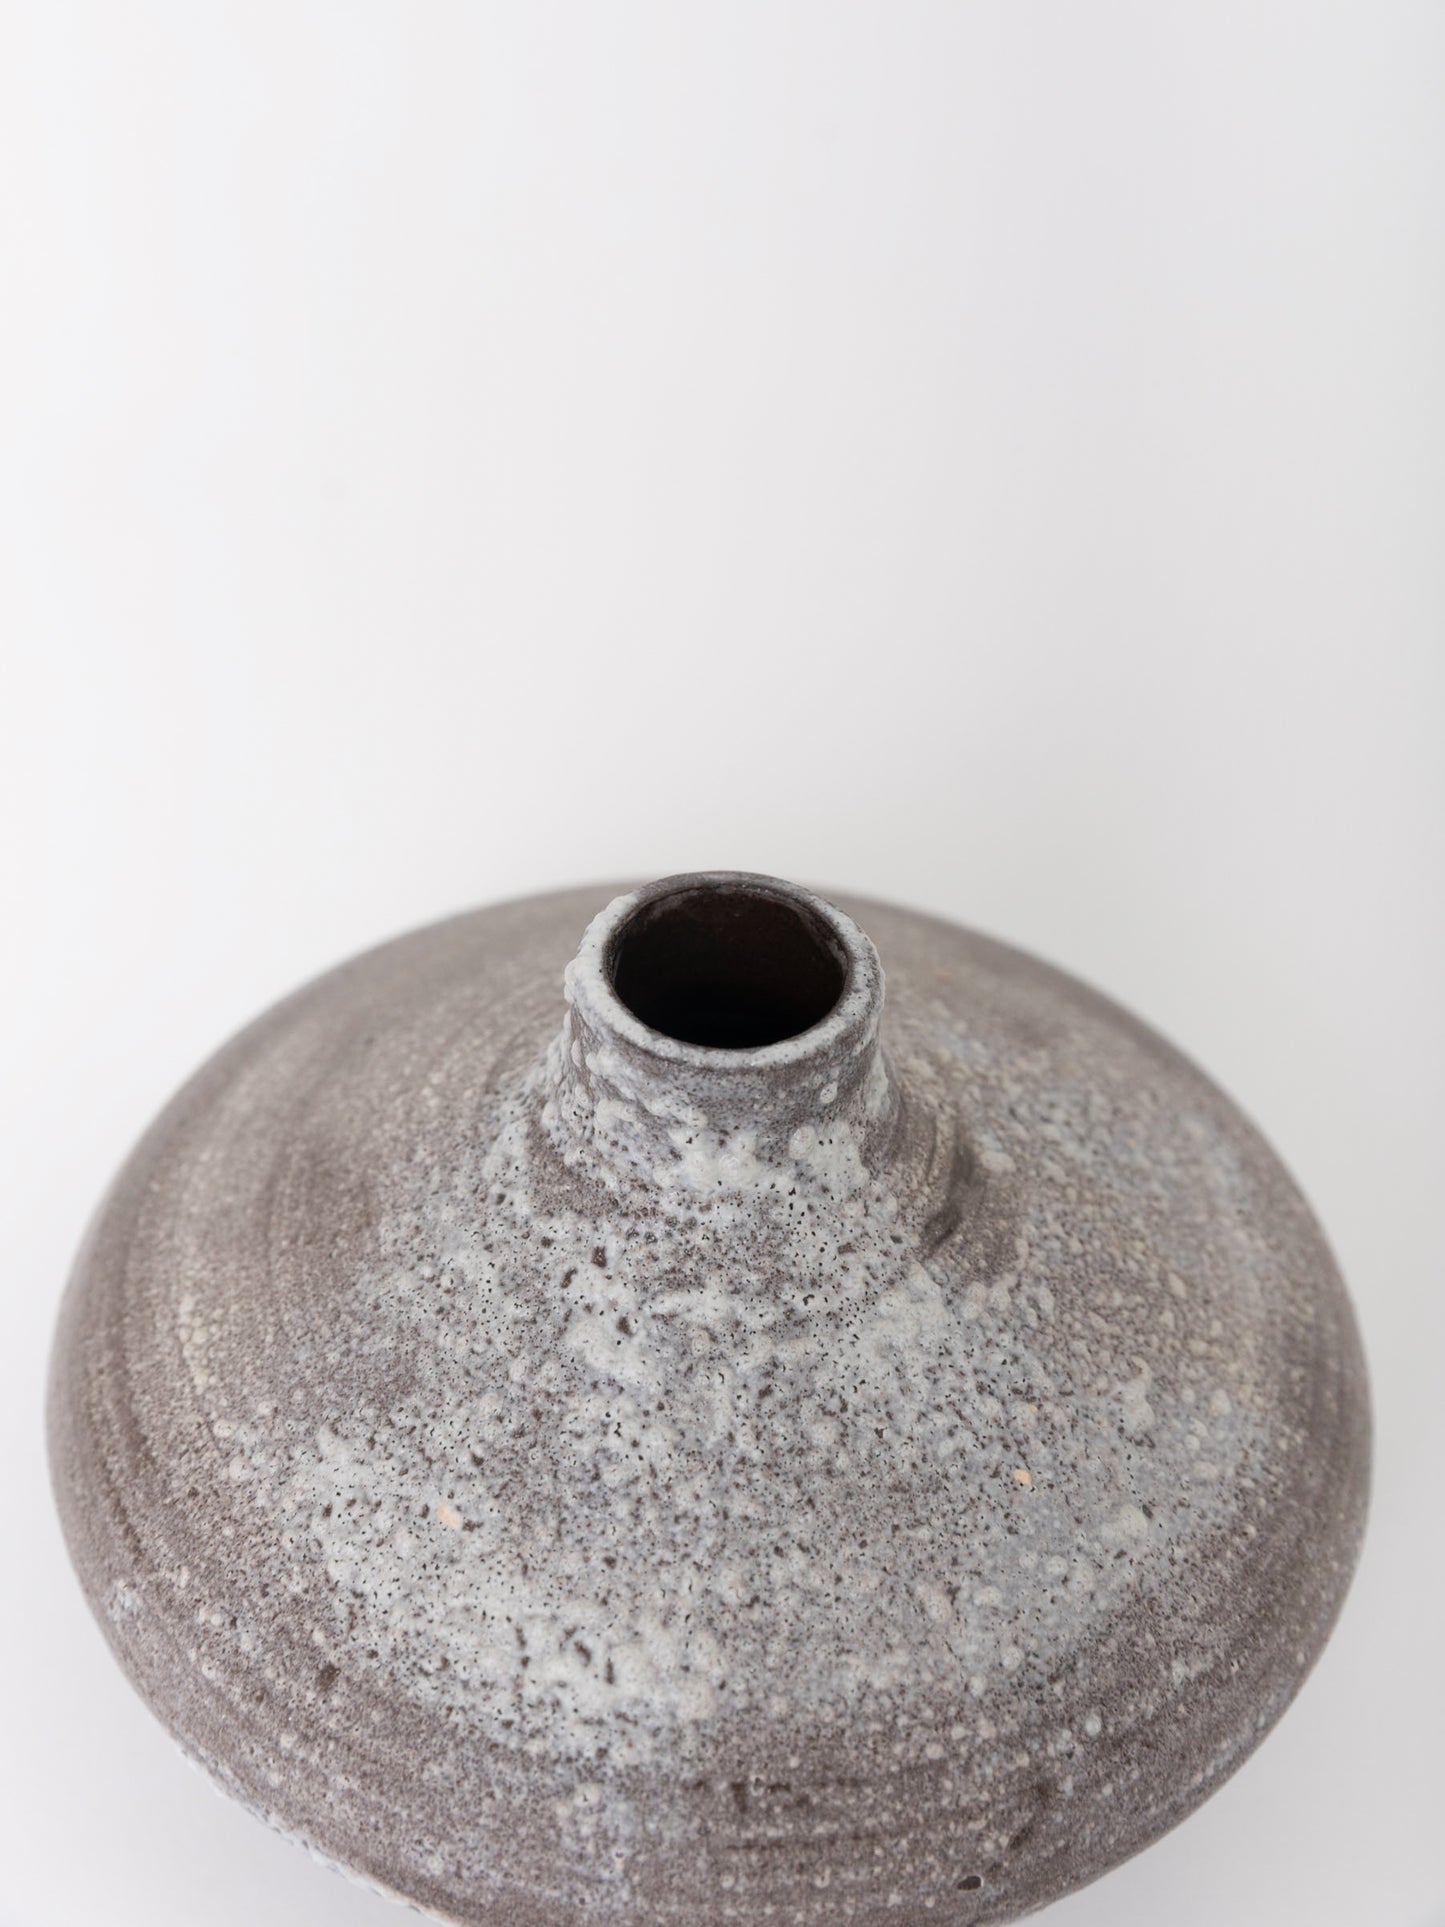 Short Bud Vase, Brown with White Lava